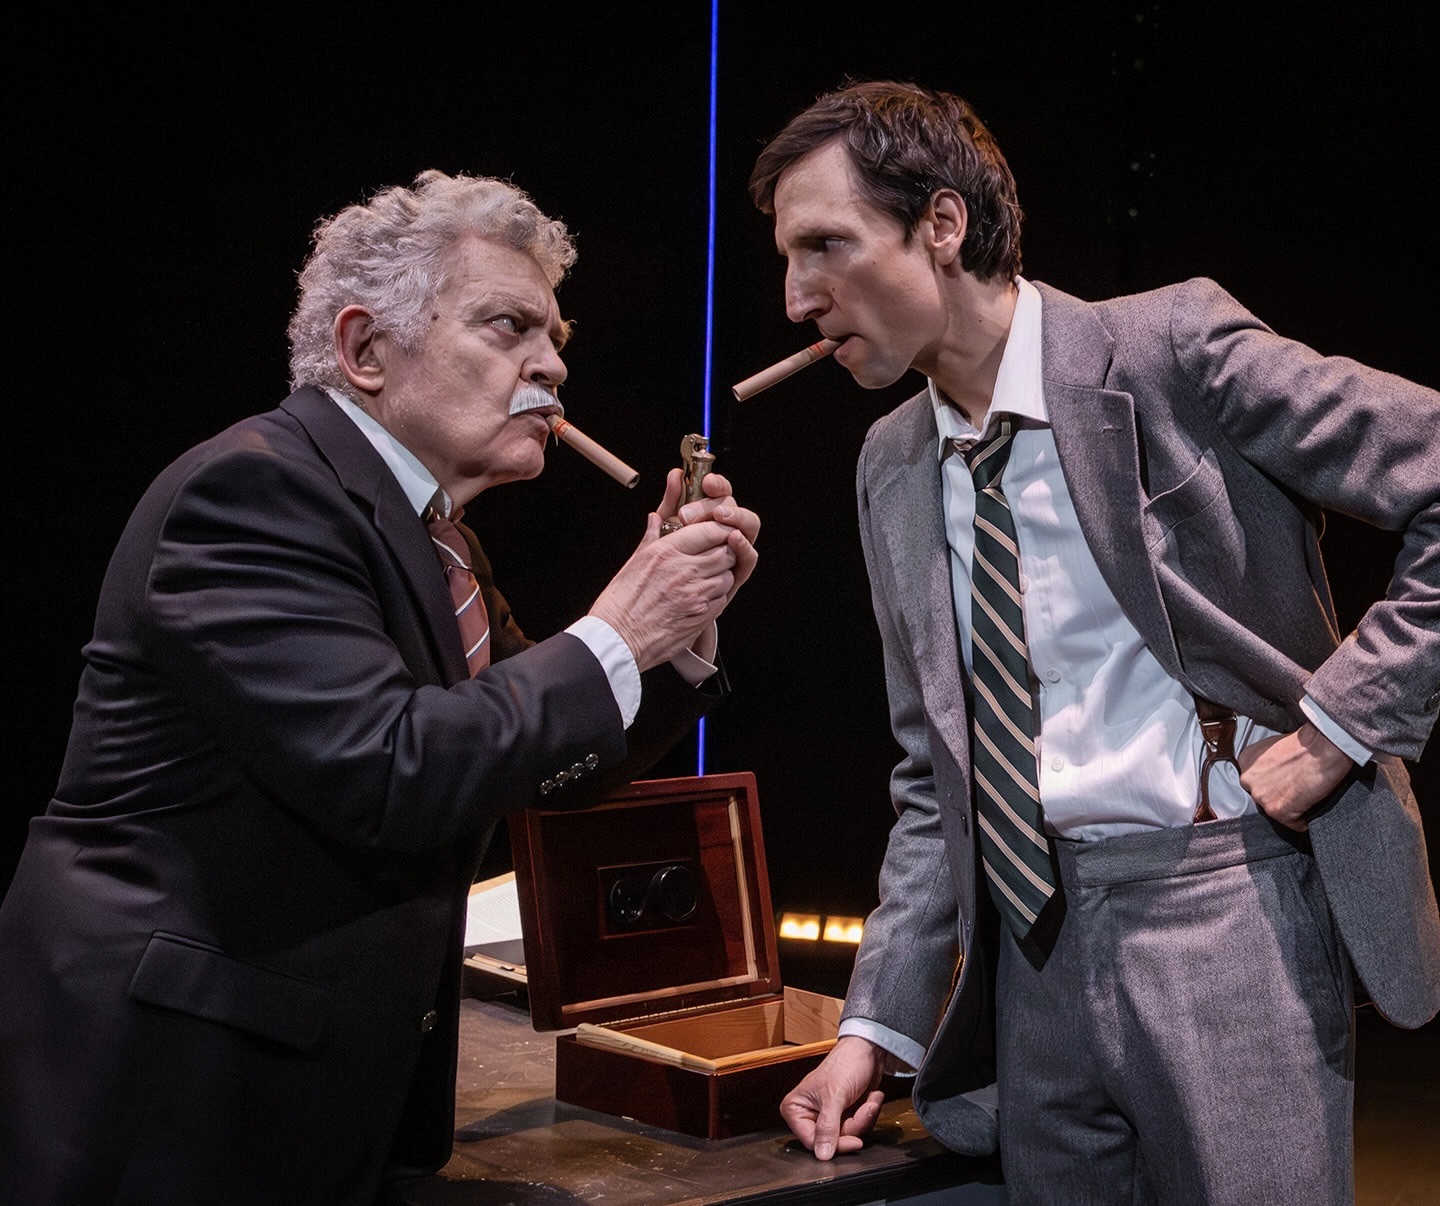 Sometimes a cigar is just a cigar, say Freud fans, but sometimes the symbolism is right out front. Old Robert (L) and young John are played by Sam Tsoutsouvas and Joseph McGranaghan in ‘A Life in the Theatre.’